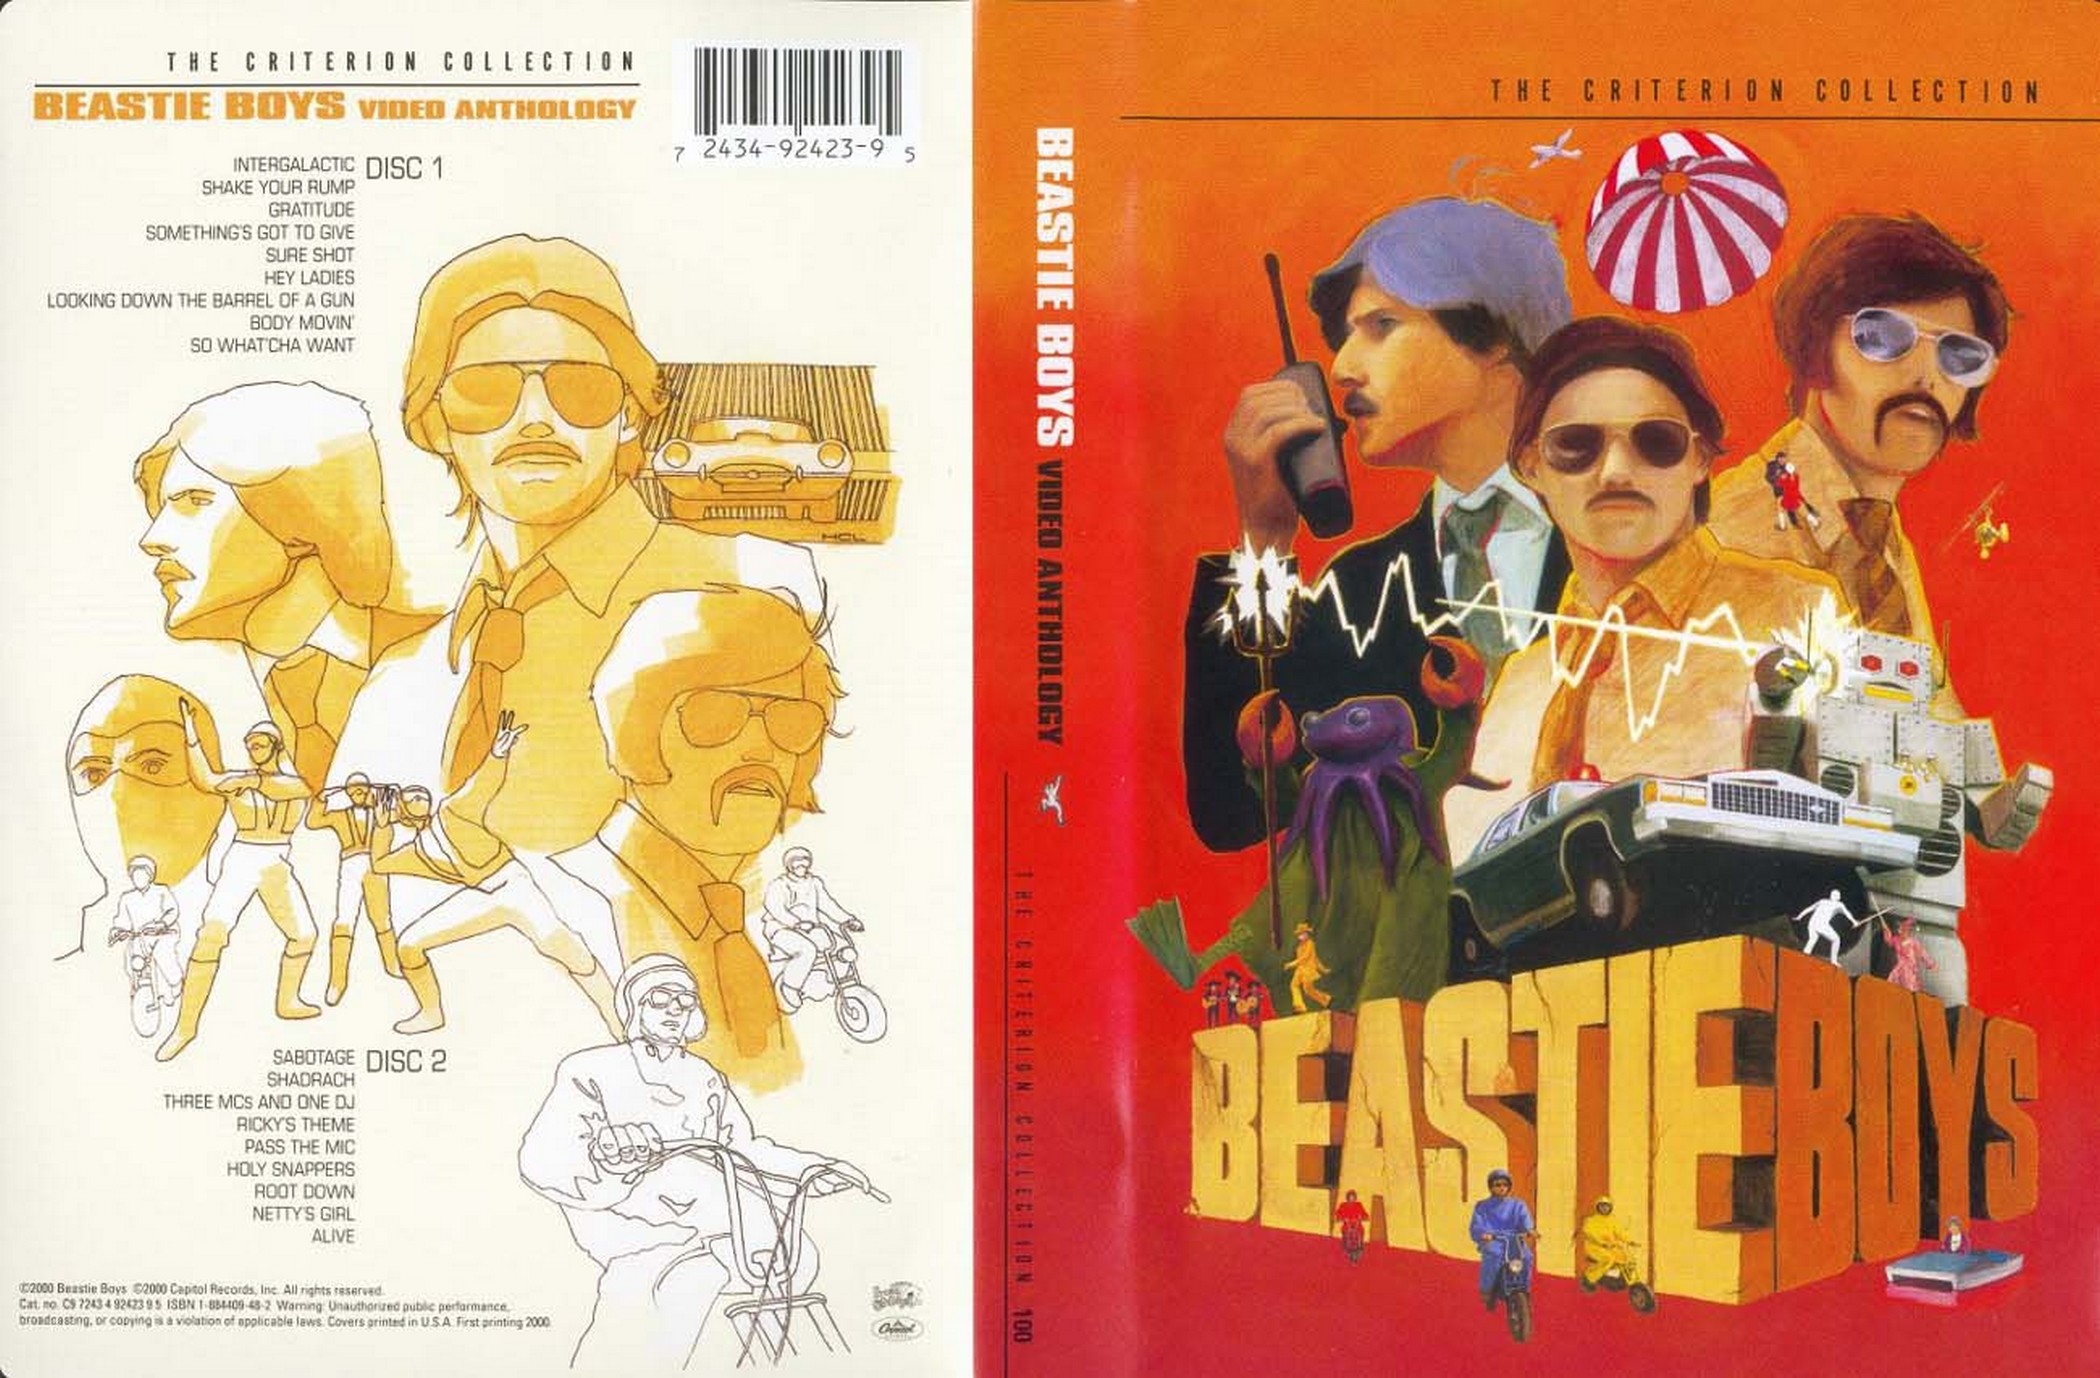 Jaquette DVD Beastie Boys - The criterion